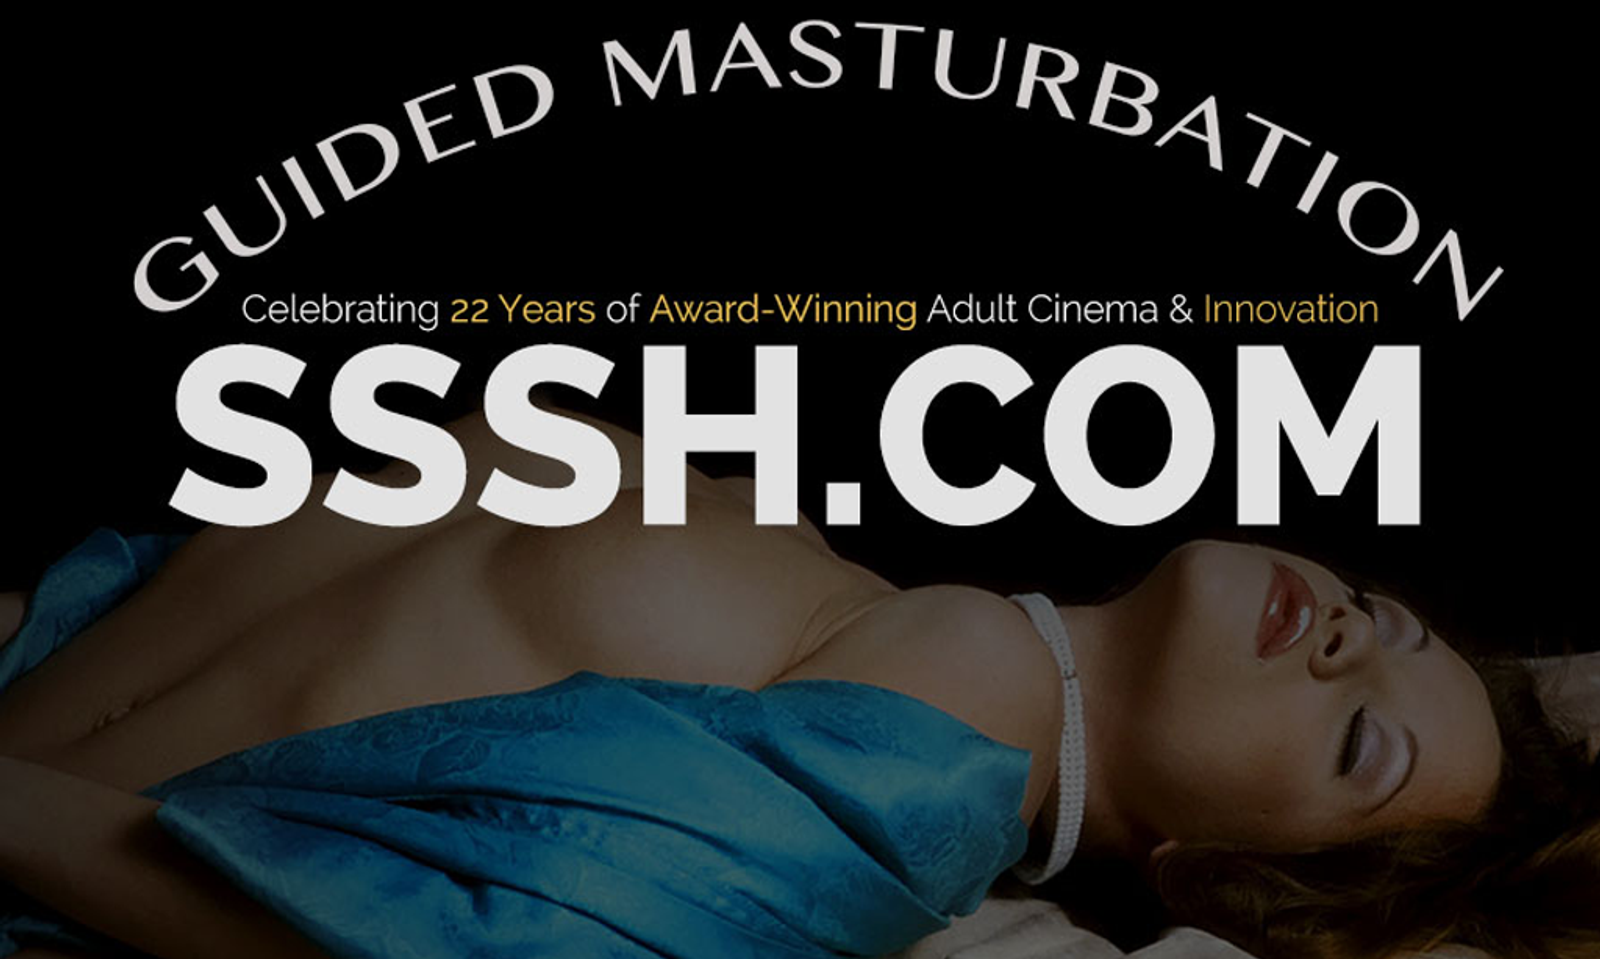 Sssh.com Adds 'Guided Masturbation for Women' Section to Site